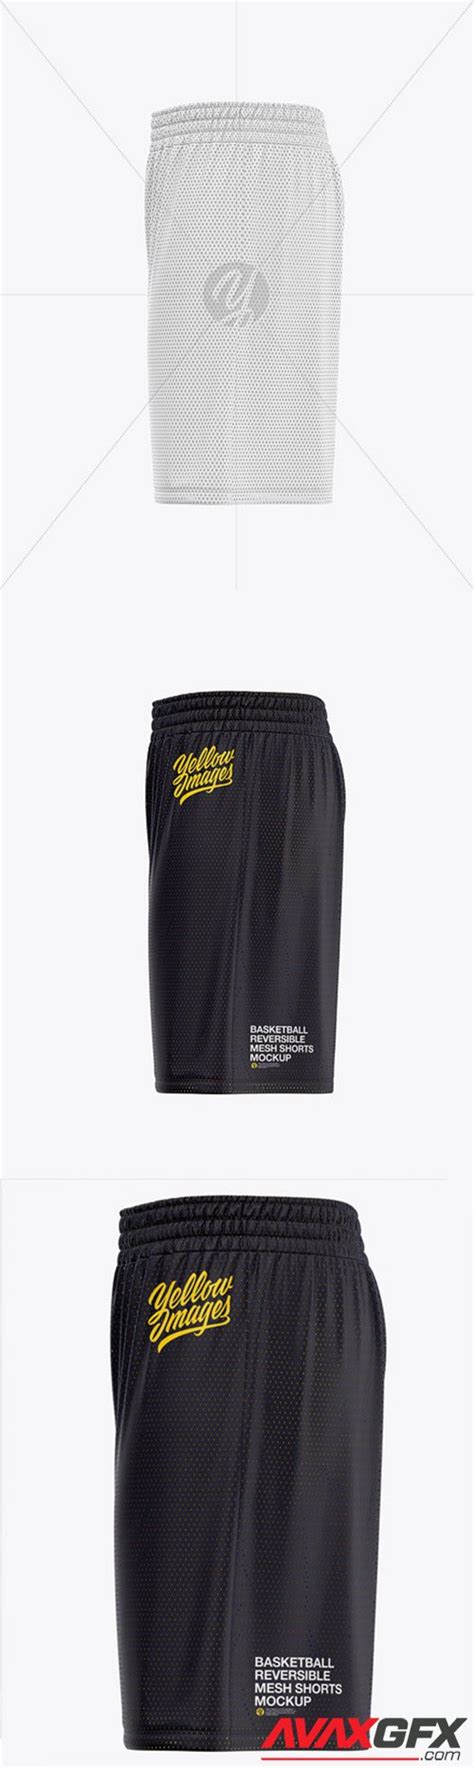 Psd file consists of smart objects. Men's Basketball Shorts Mockup - Side View 40528 TIF ...